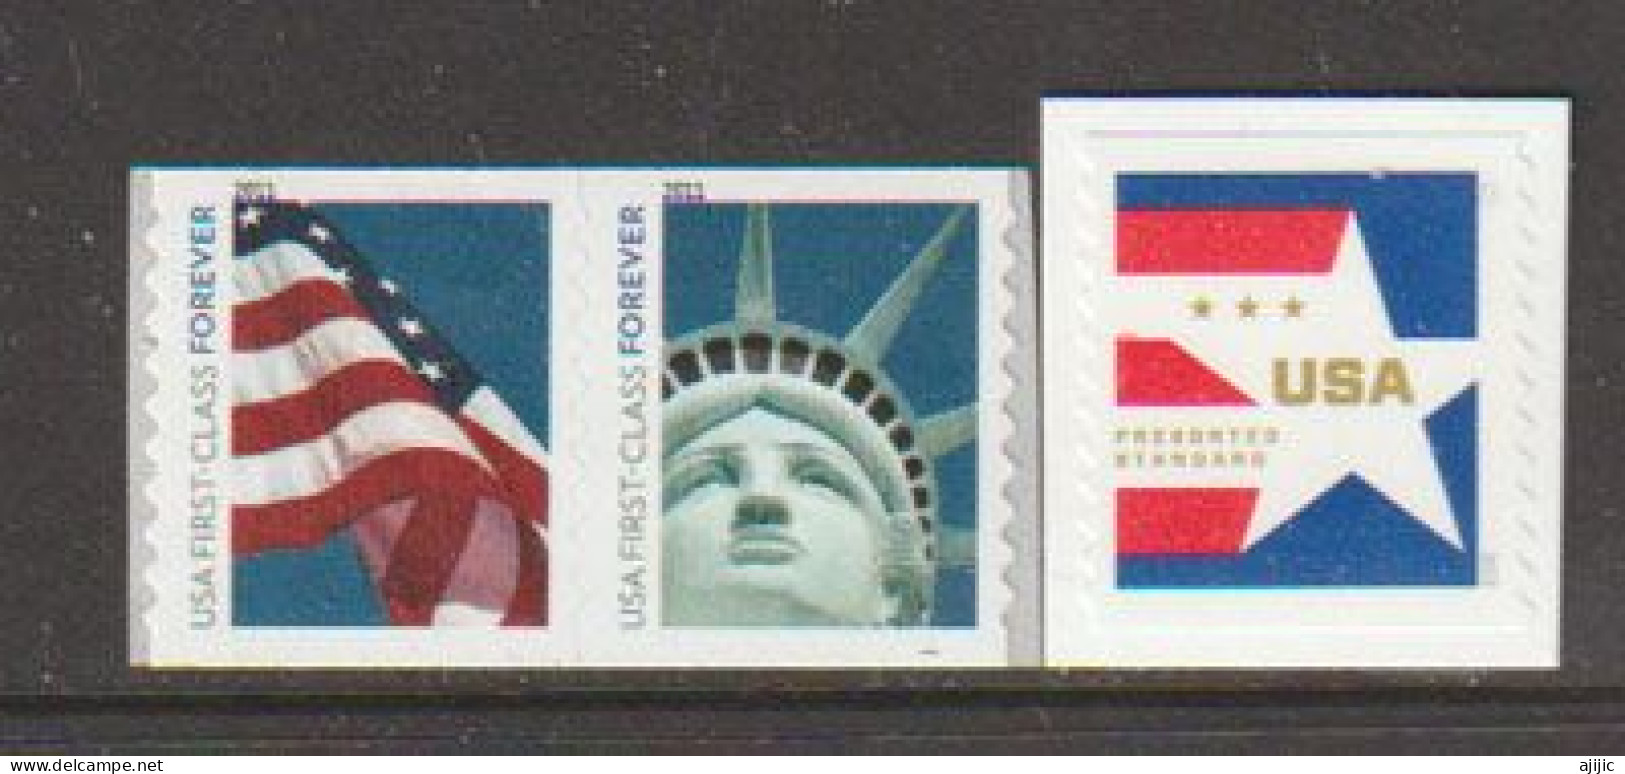 Flags USA (Star-Spangled Banner ) 3  Timbres Neufs **  (First Class Forever Stamps) - Neufs